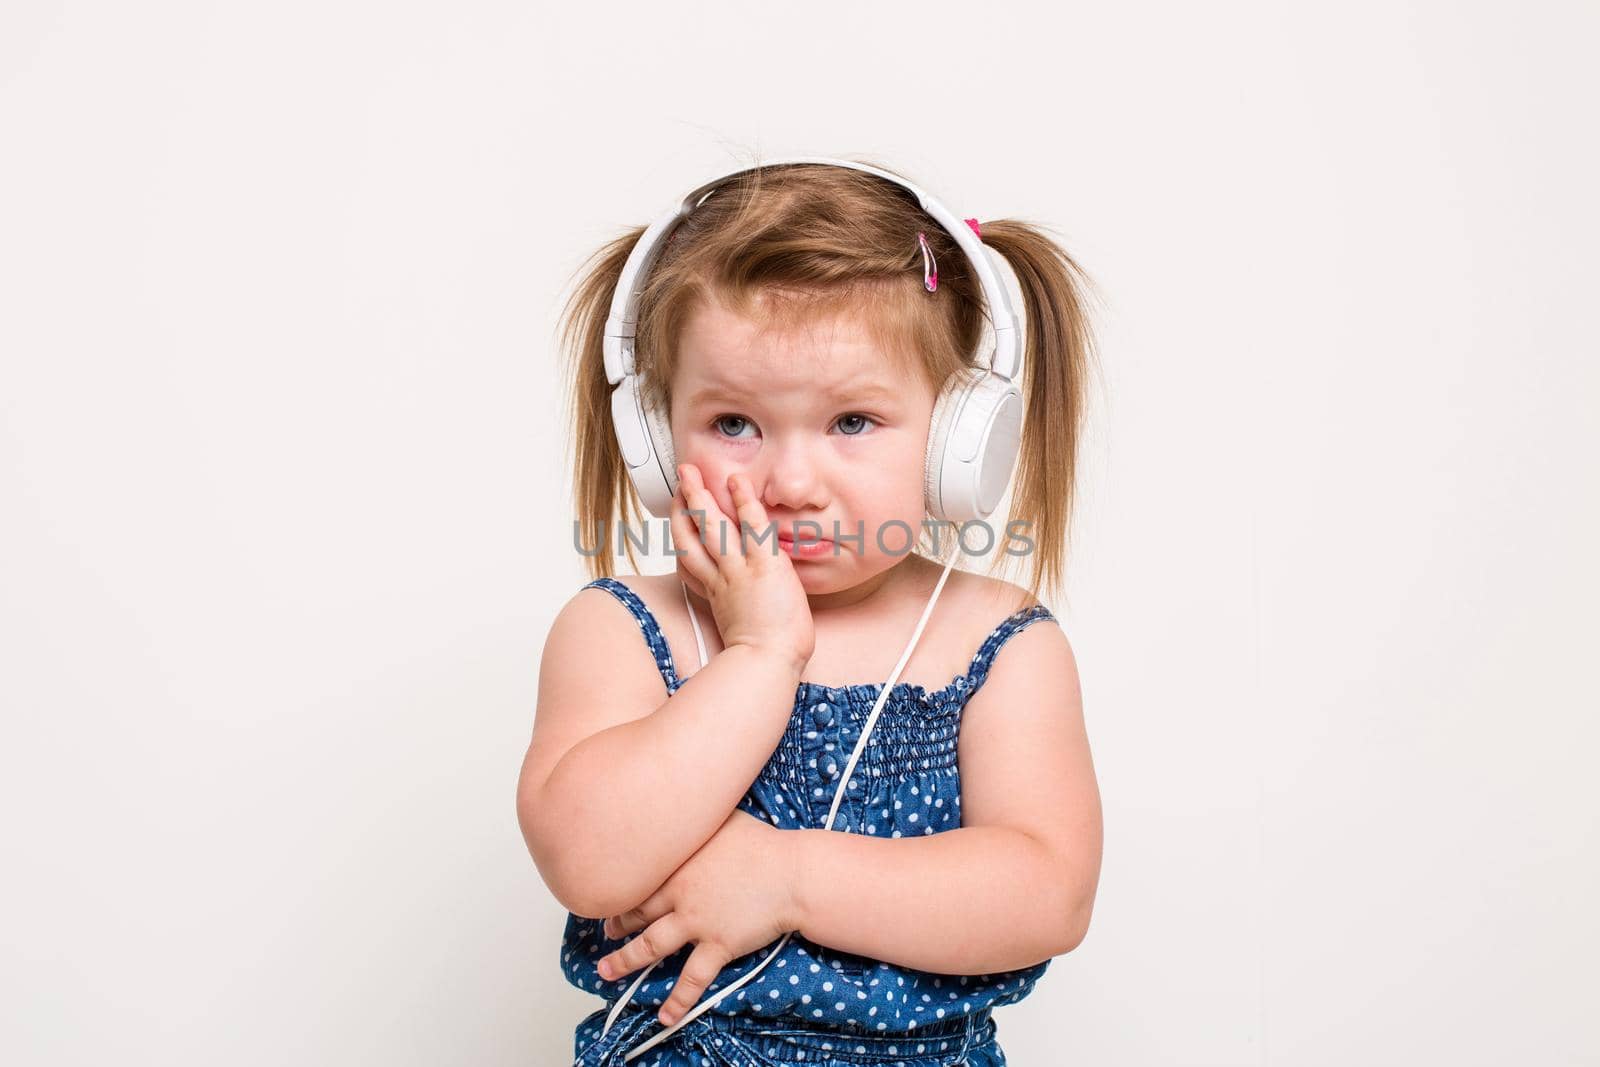 Cute little girl in headphones listening to music using a tablet on white background. The child does not look at the camera